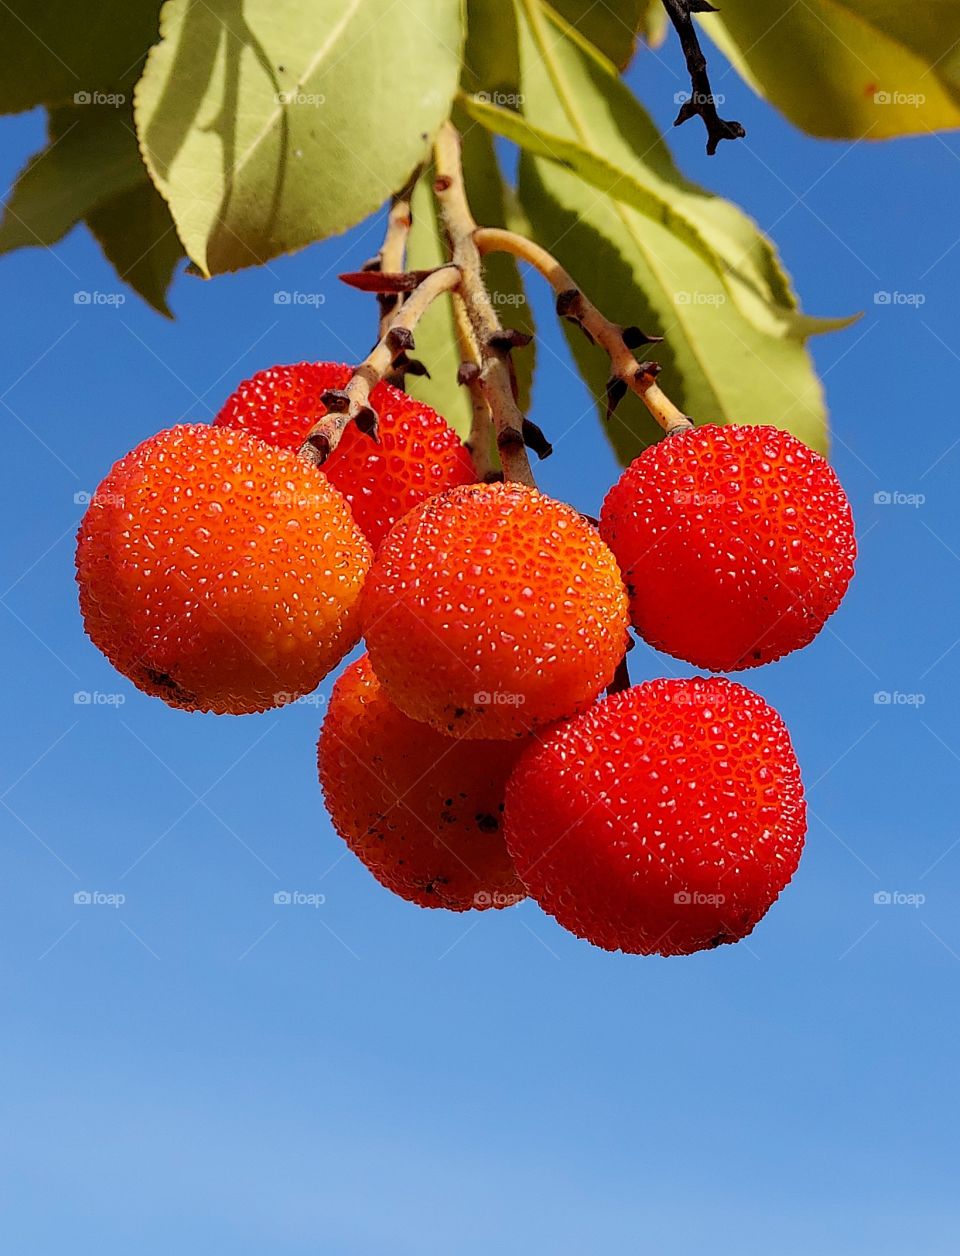 red berry fruit tree with blue skies in the background